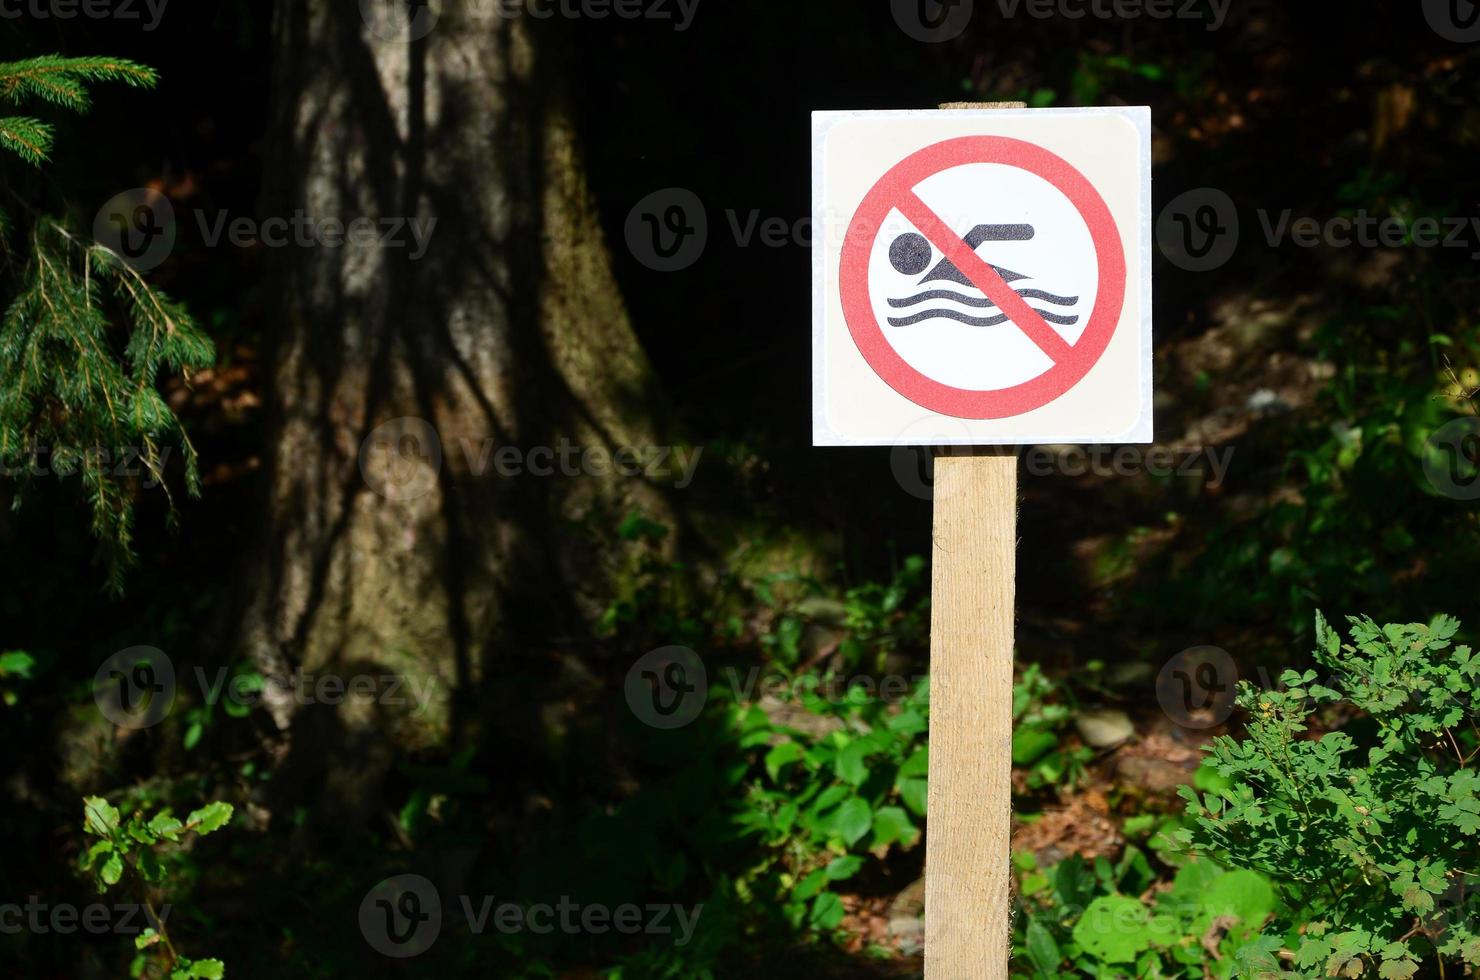 A pillar with a sign denoting a ban on swimming. The sign shows a crossed-out floating person photo